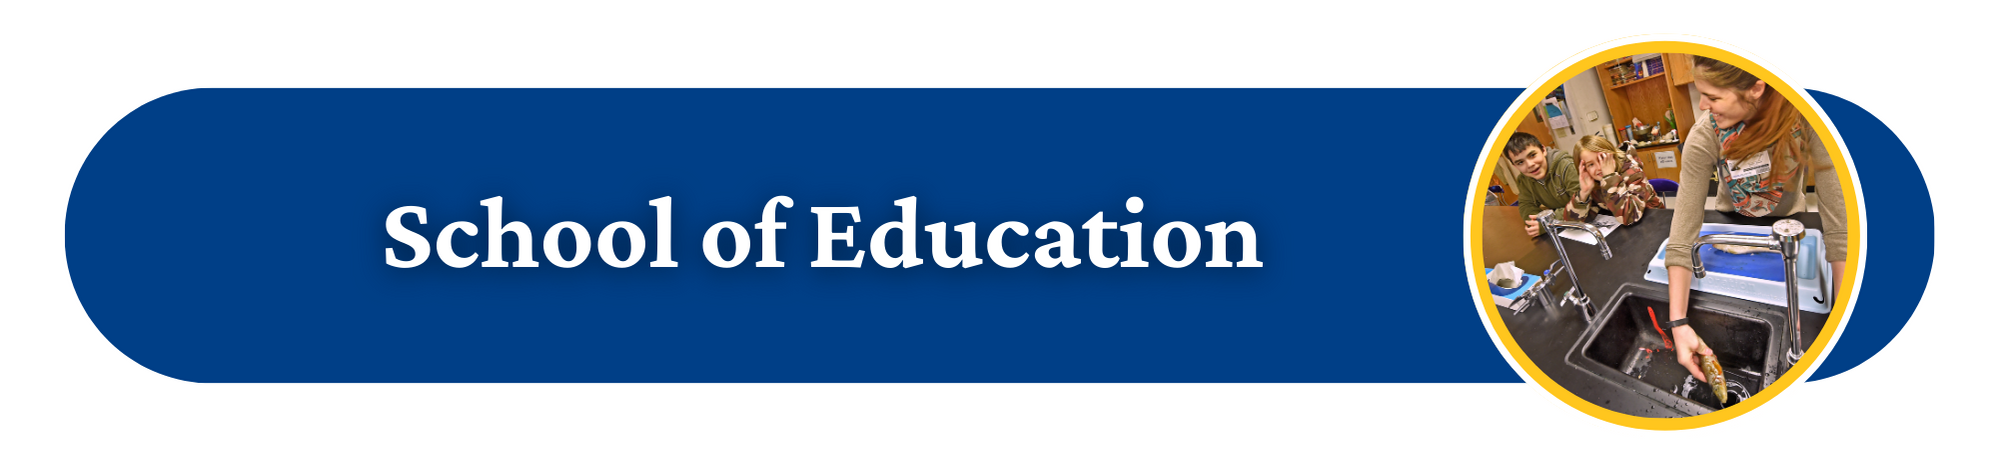 School of Education Button